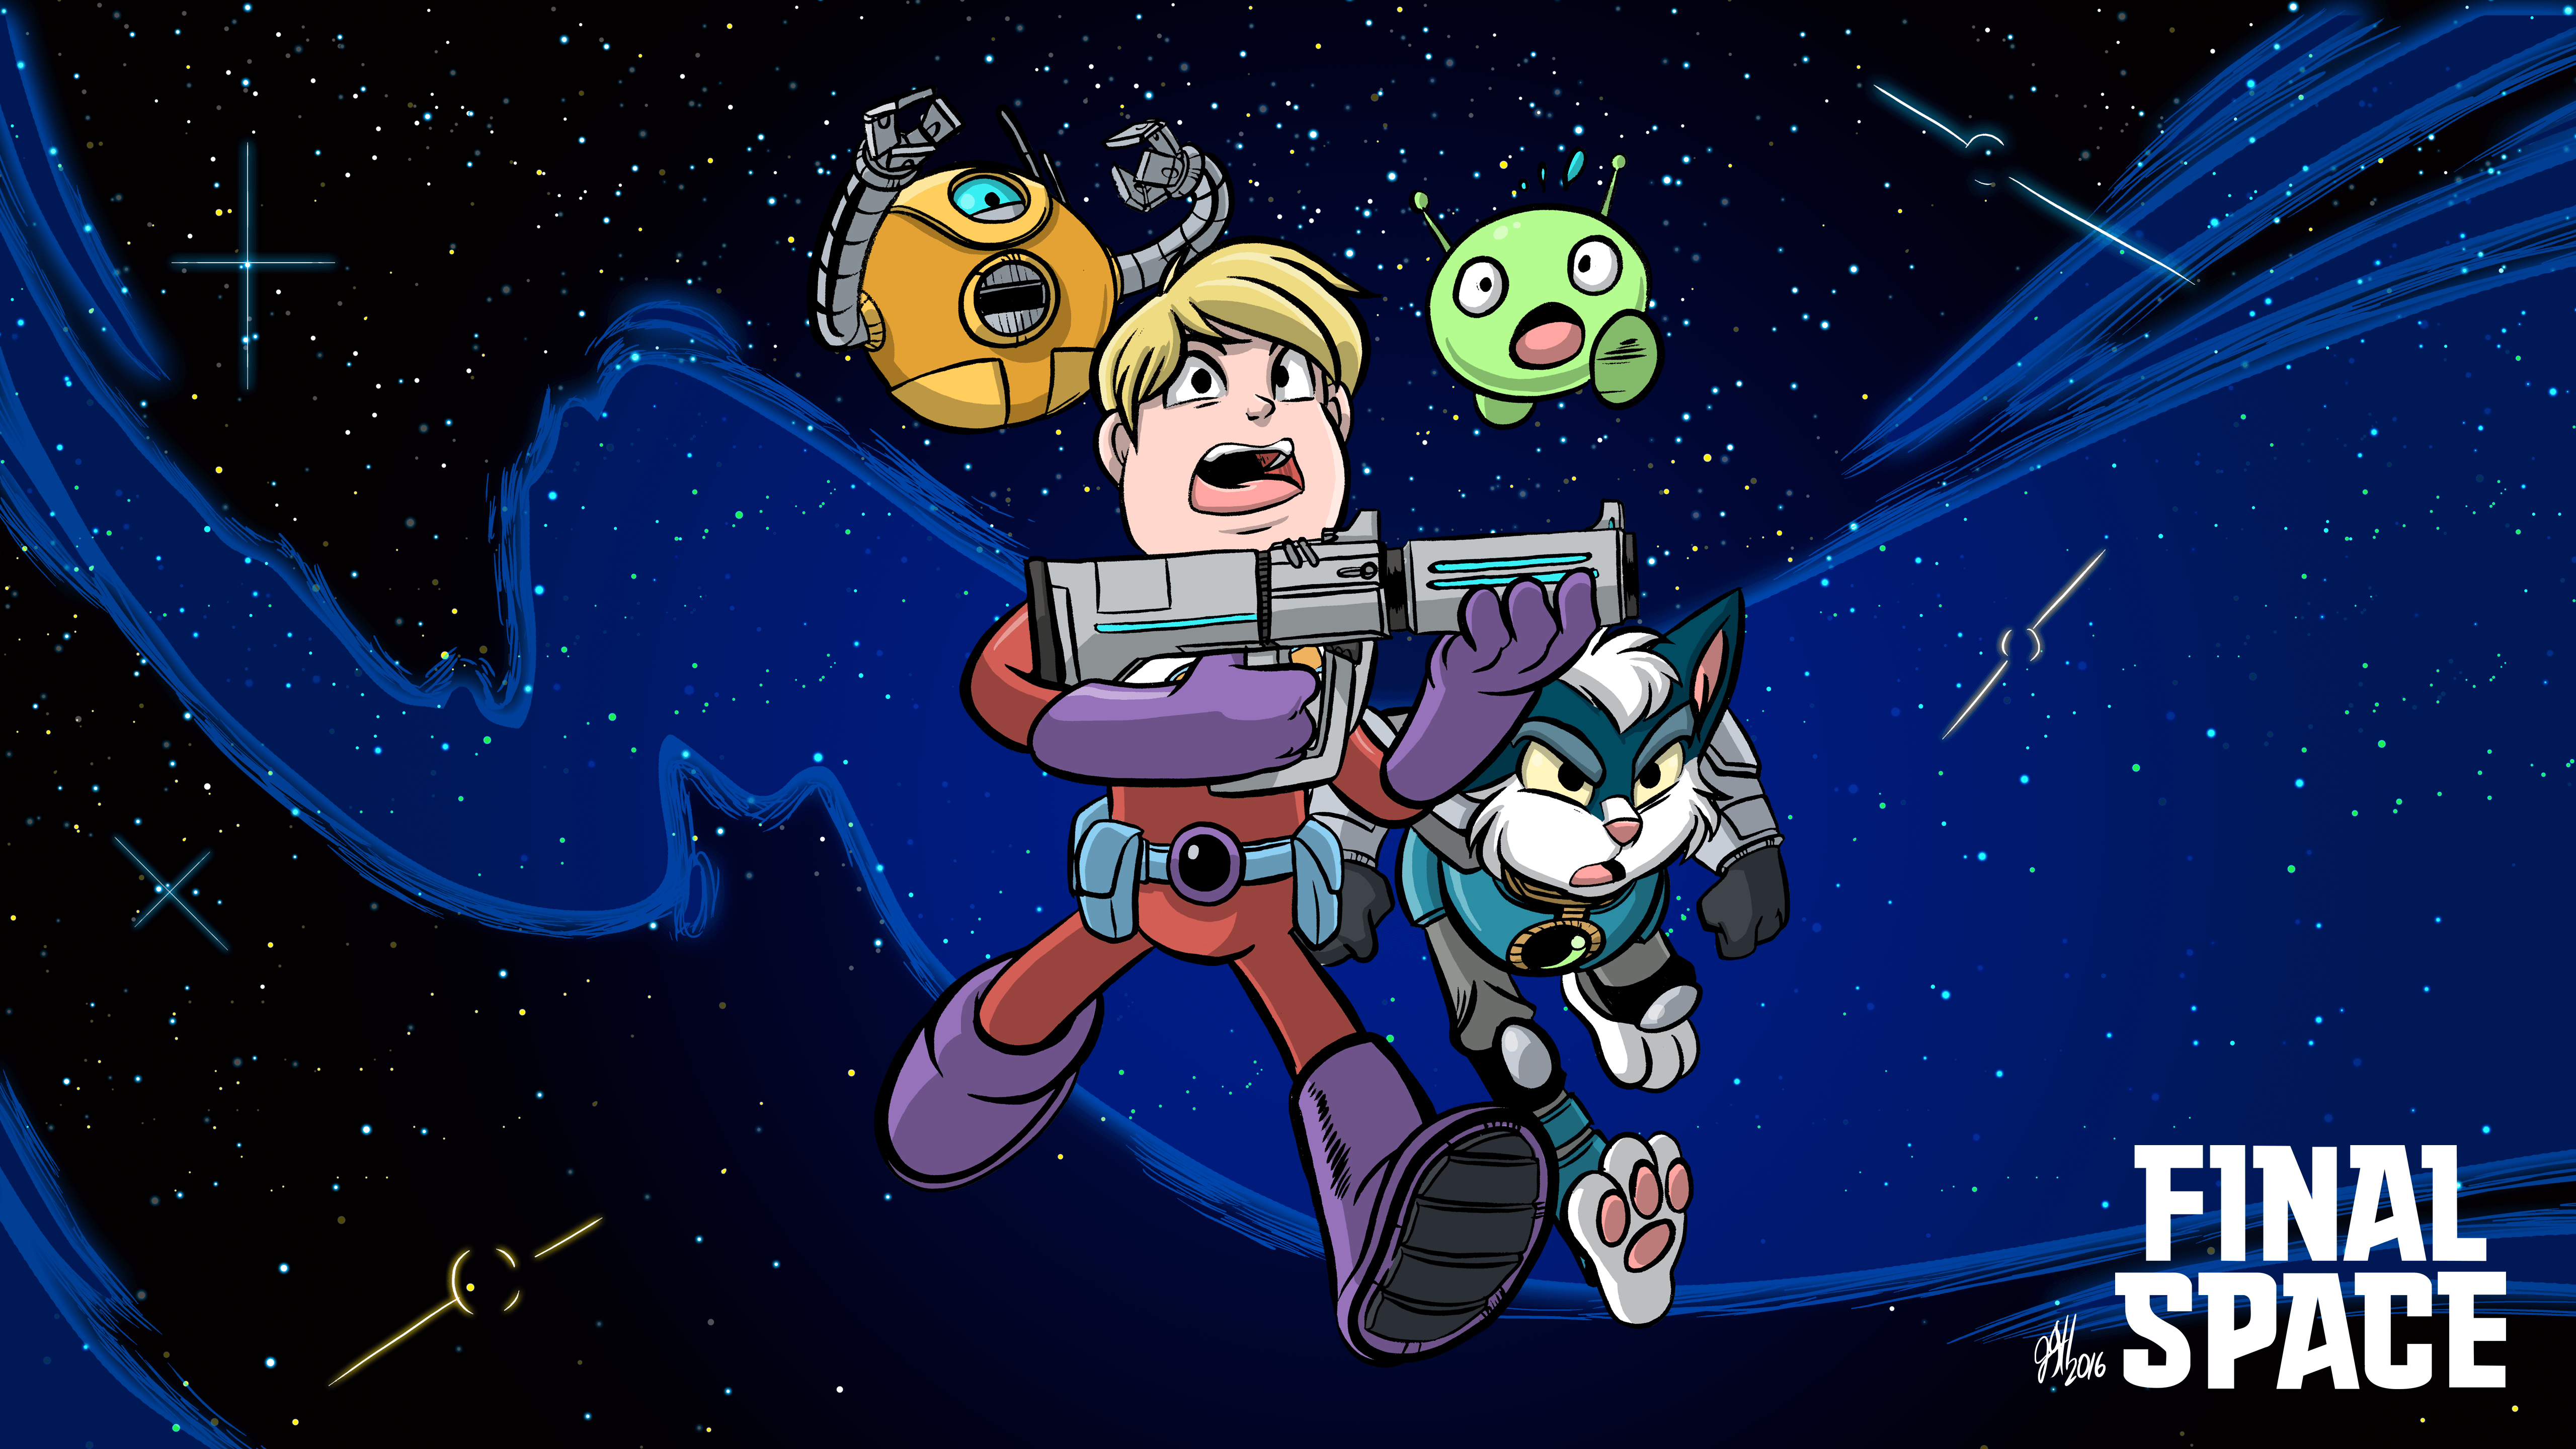 We need more Final Space wallpaper. Hopefully more will surface